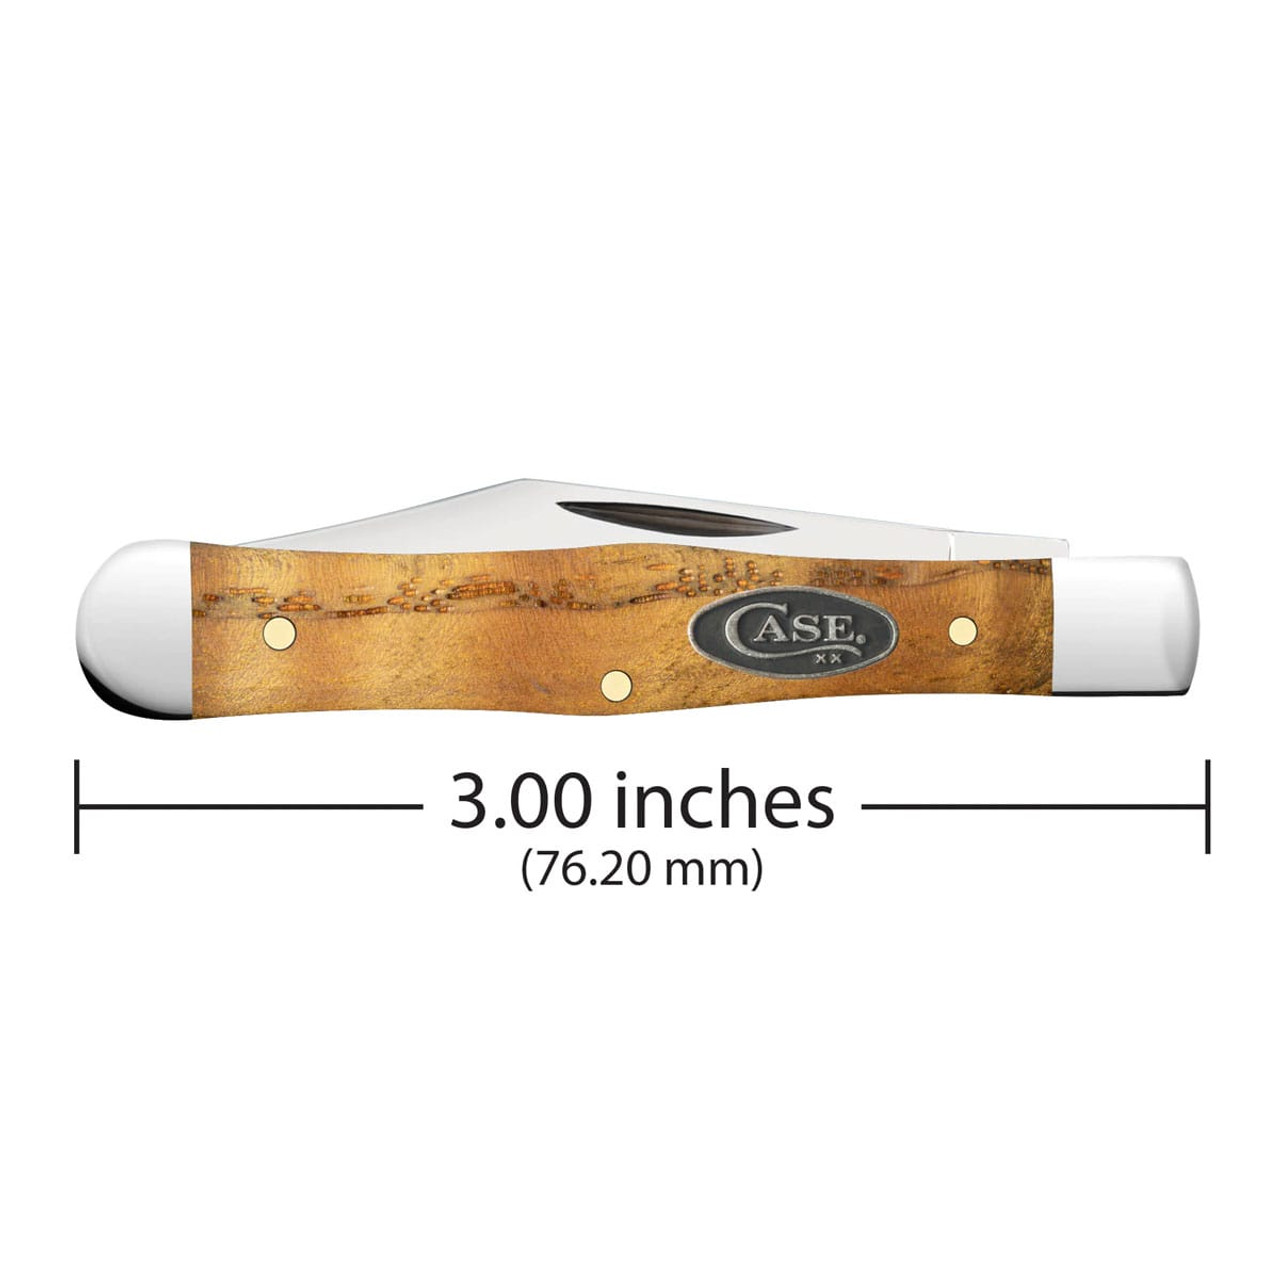 CASE XX Swell Center Jack Yellow Curly Oak Knife 47129